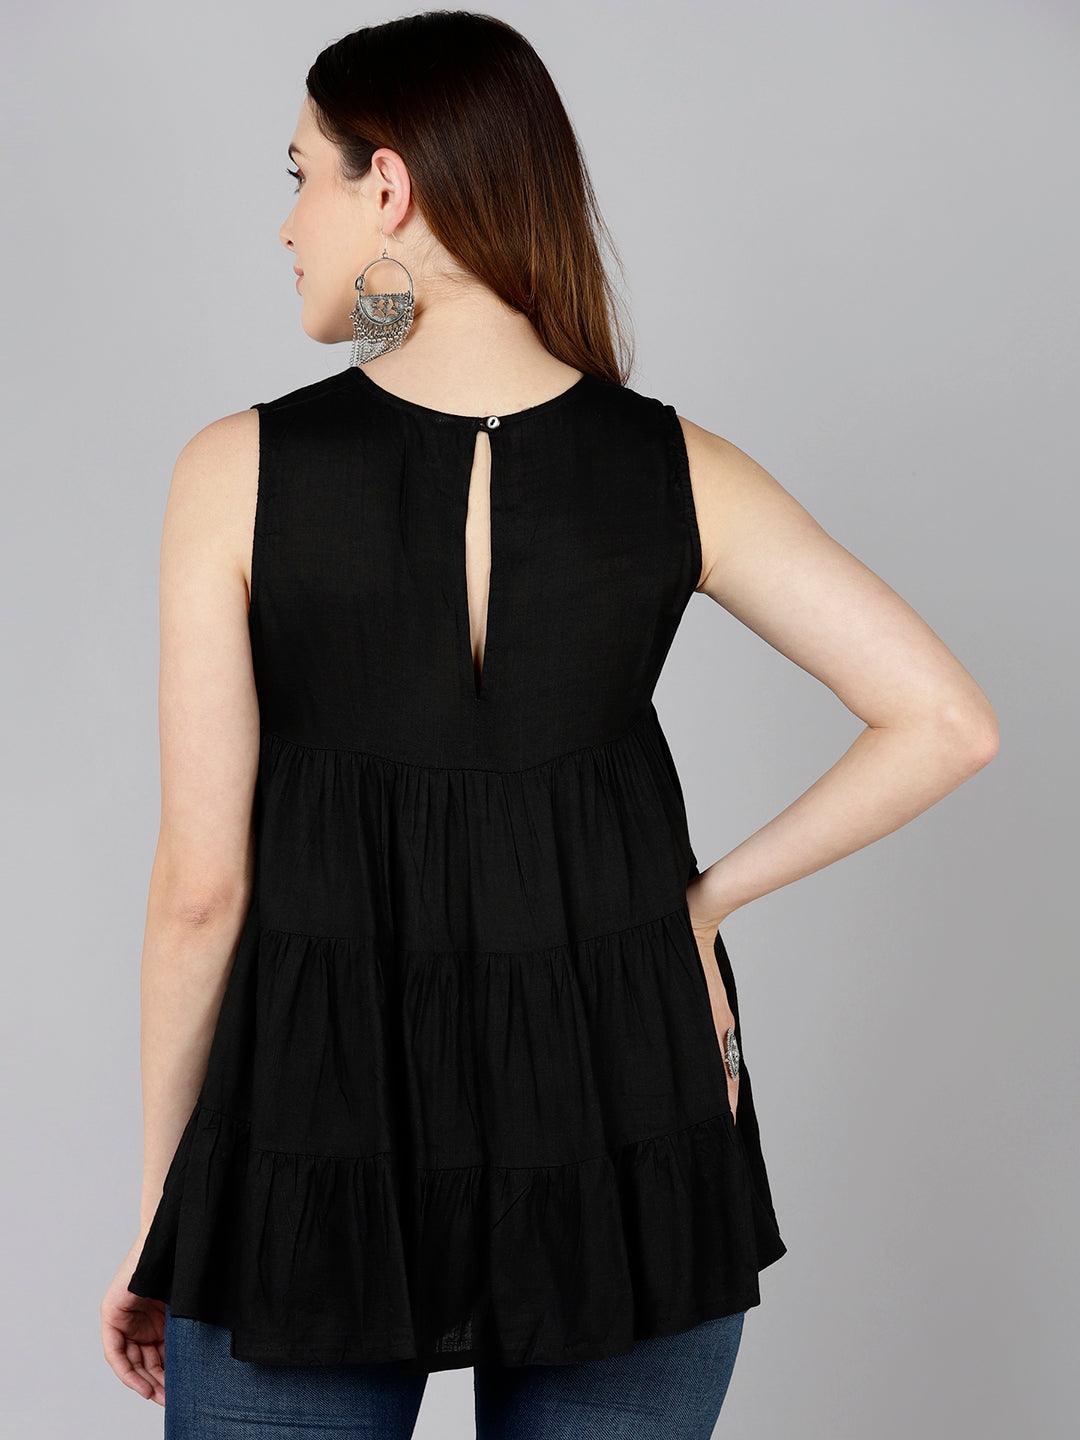 Solid Black Tiered Top - Znxclothing